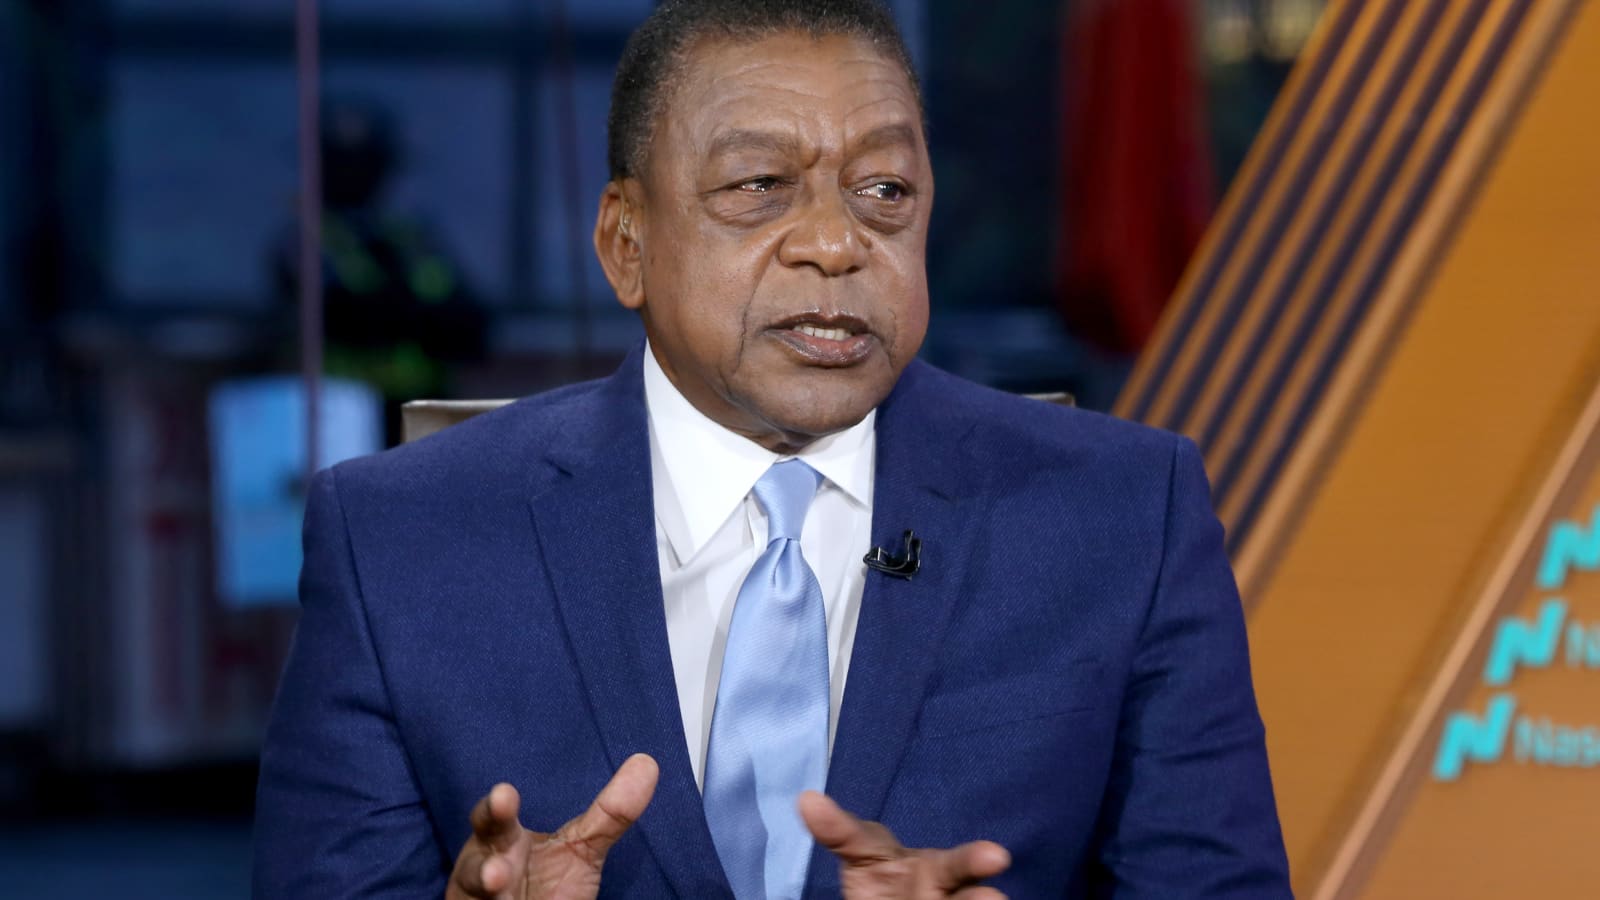 BET Founder Robert Johnson Says Biden’s Build Back Better Act Should Include Steps to Increase Black Wealth